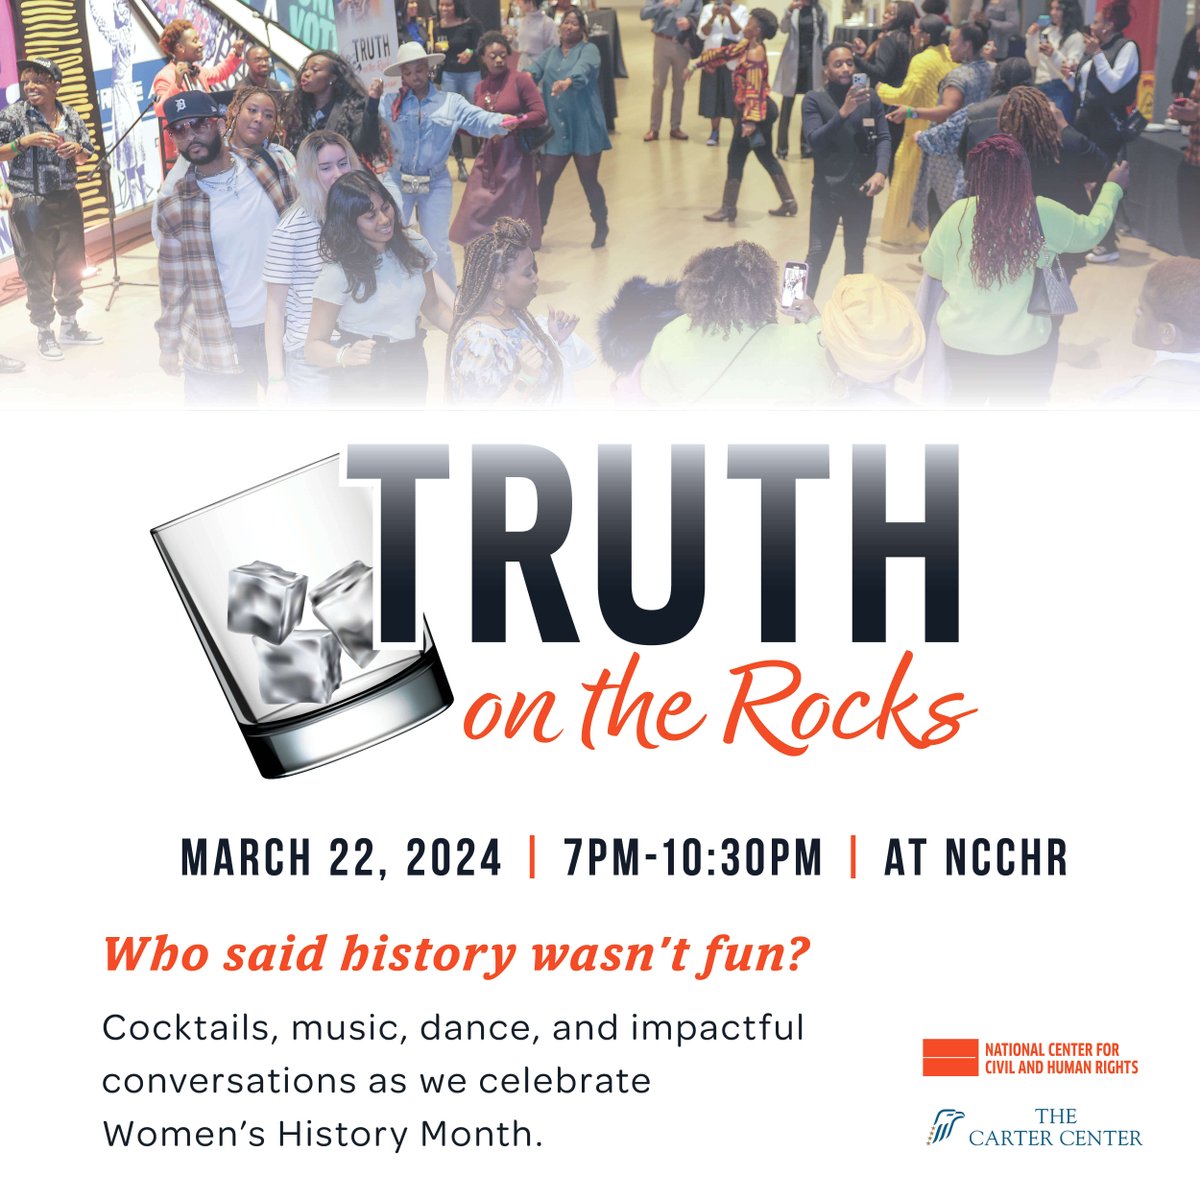 Join us for Truth on the Rocks on Friday, March 22 at 7PM as we partner with the Carter Center for a Women’s History Month celebration. Advanced tickets are $30. Register today! #FeelthePower #TruthOnTheRocks #Dialogue #Connection ow.ly/1BLx50QJZRJ